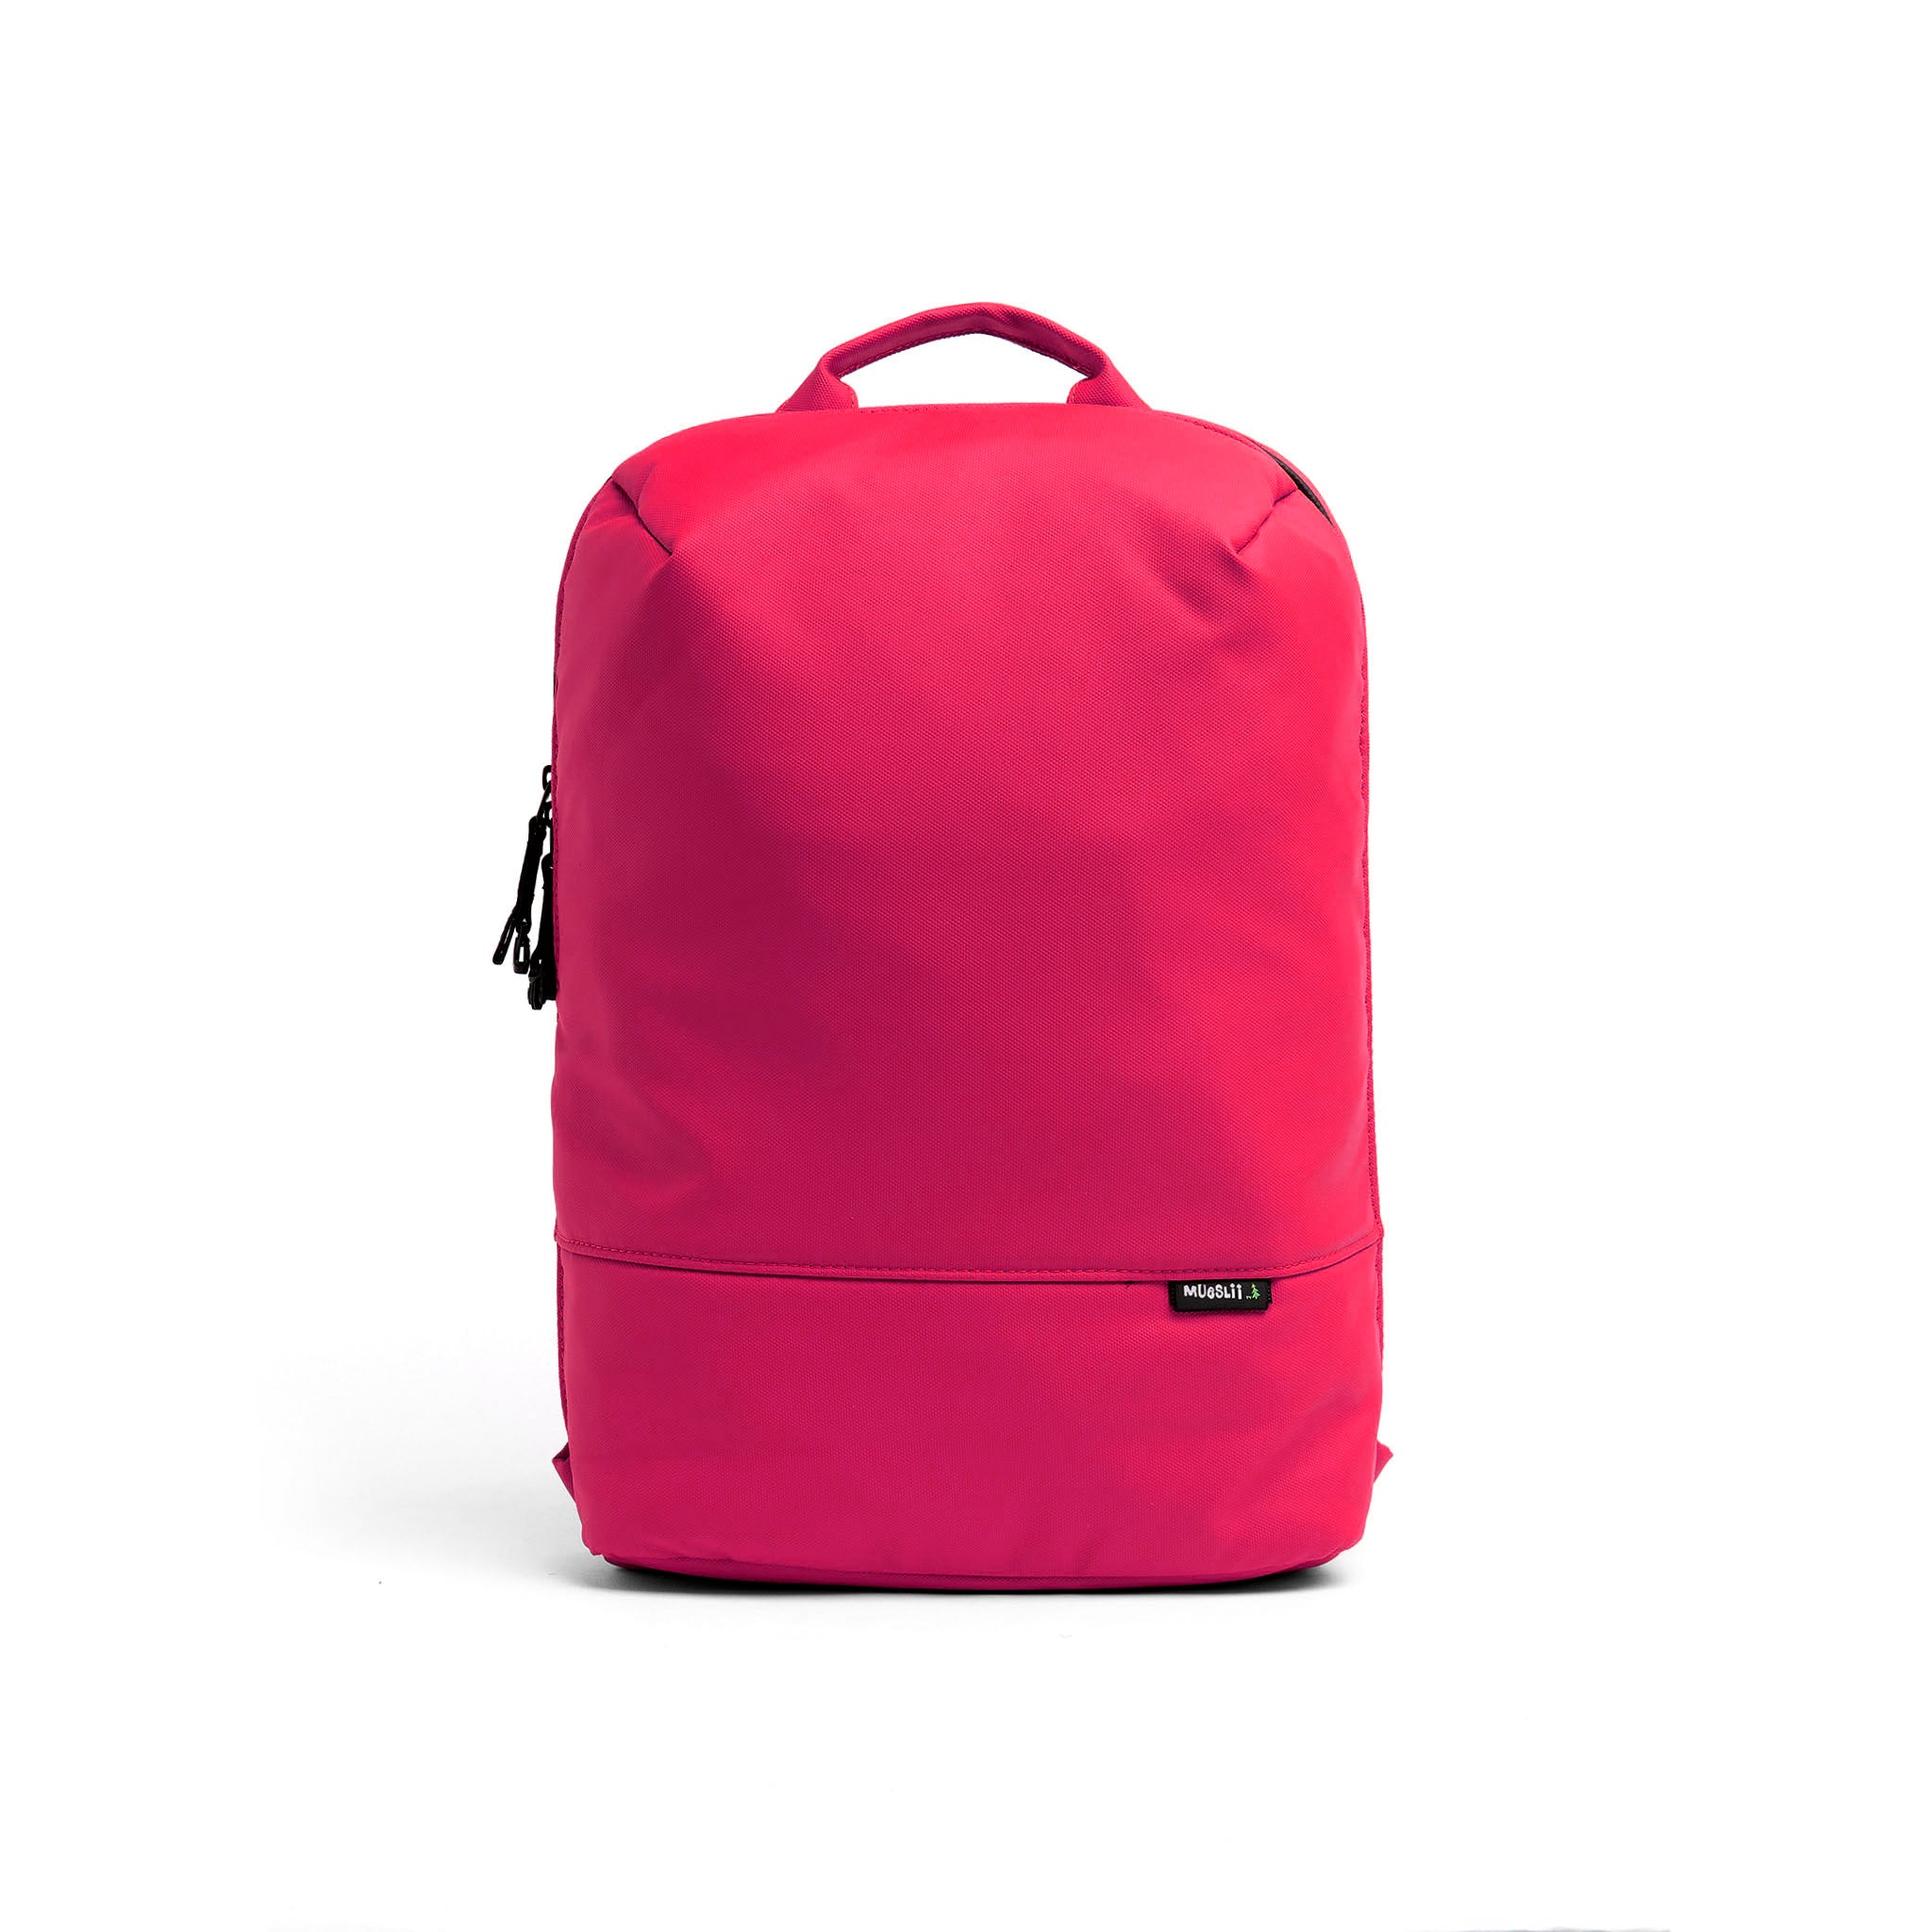 Mueslii daily backpack, made of PU coated waterproof nylon, with a laptop compartment, color pink, front view.